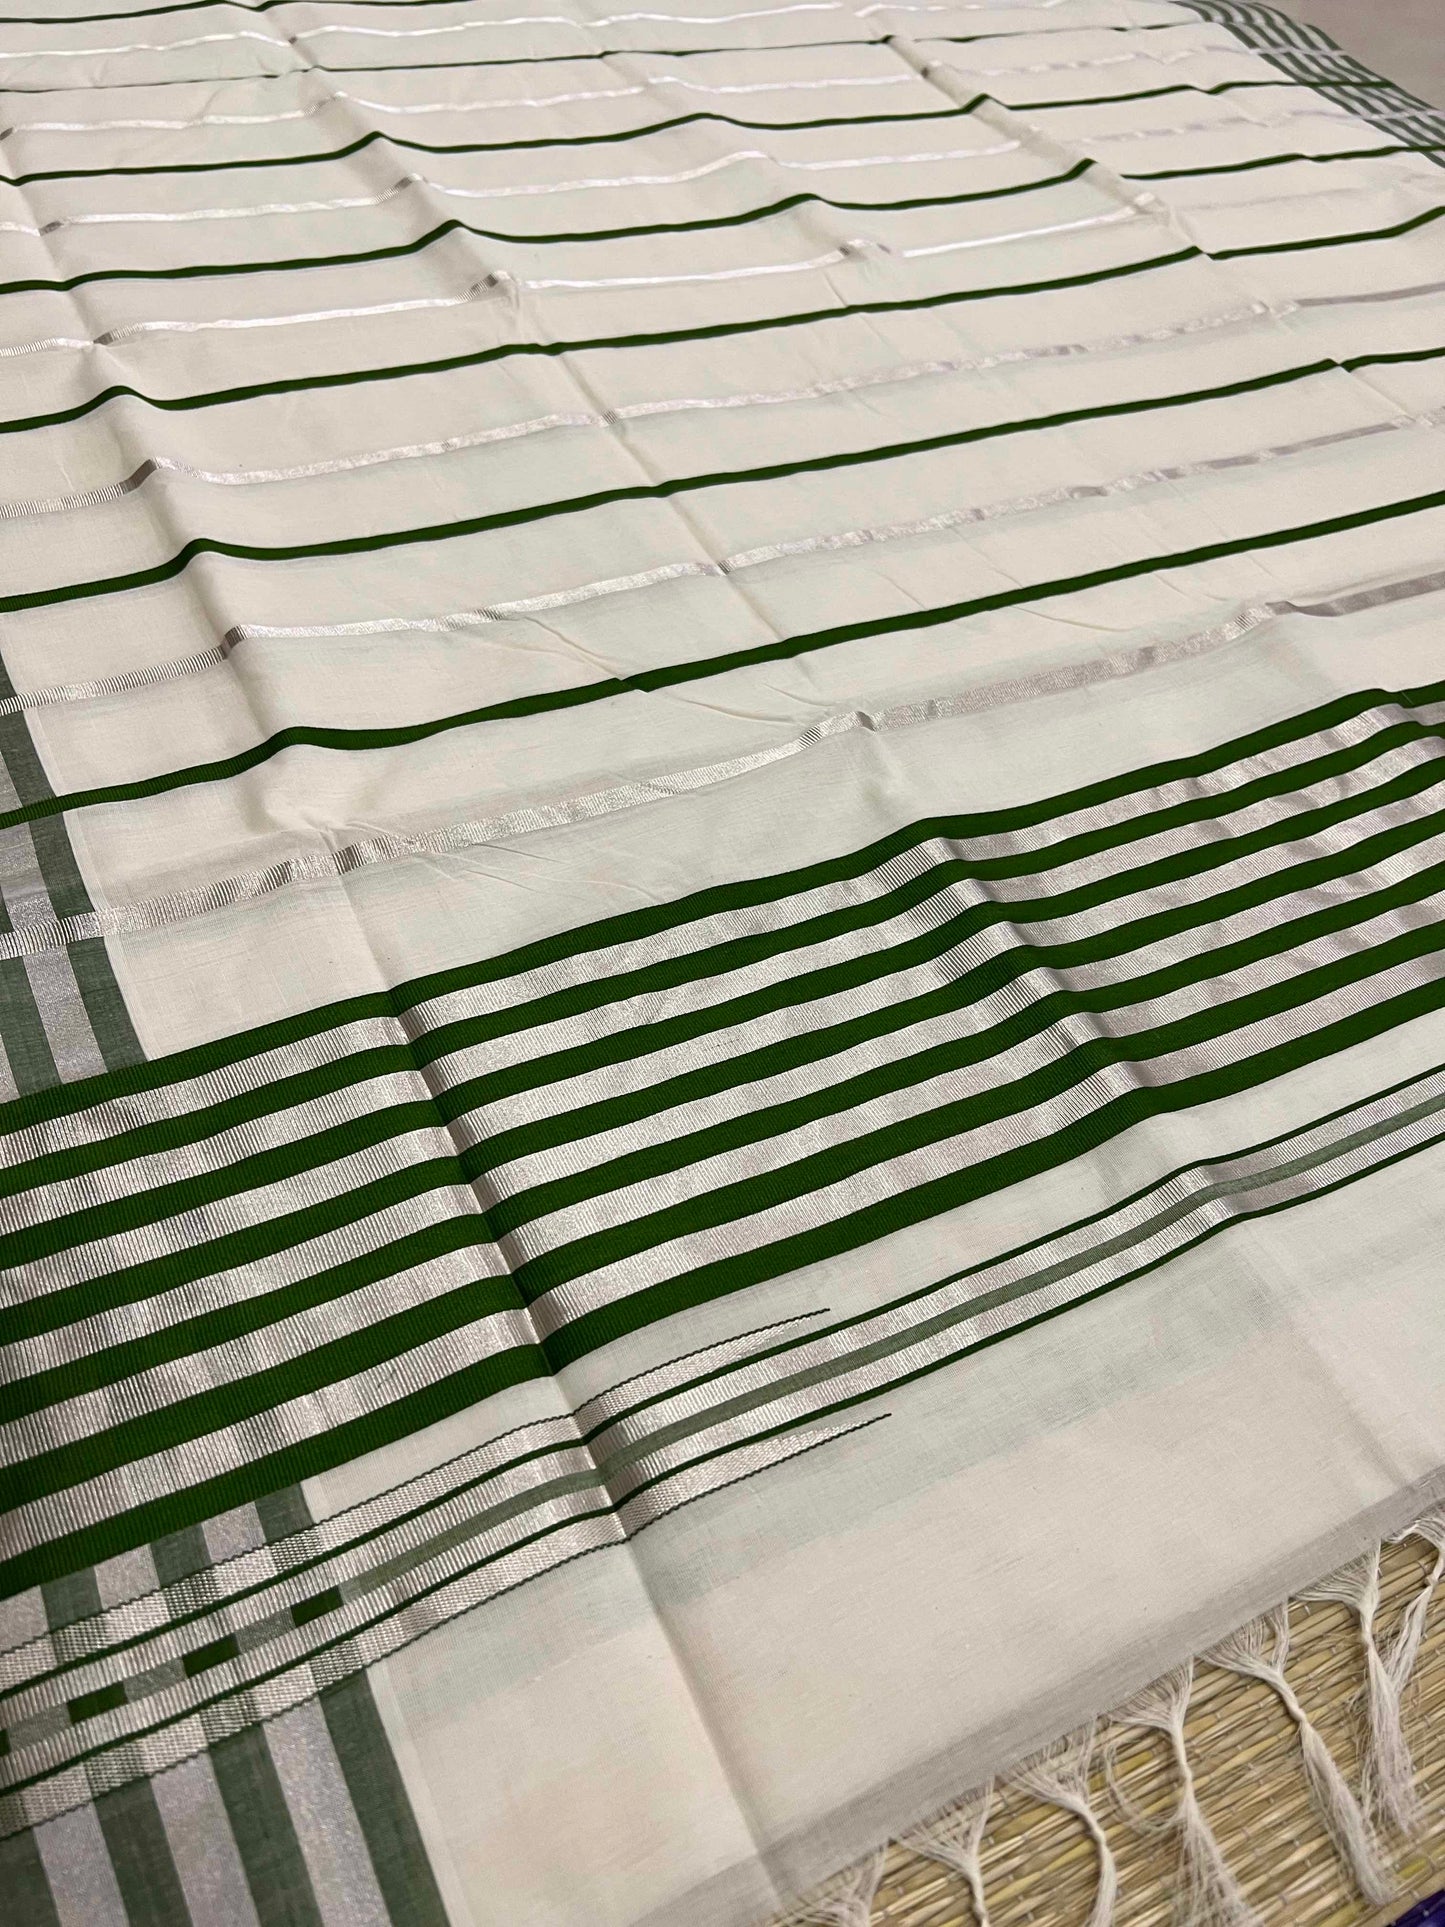 Southloom Premium Handloom Saree with Silver Kasavu and Green Lines Across Body and Lines Design Pallu